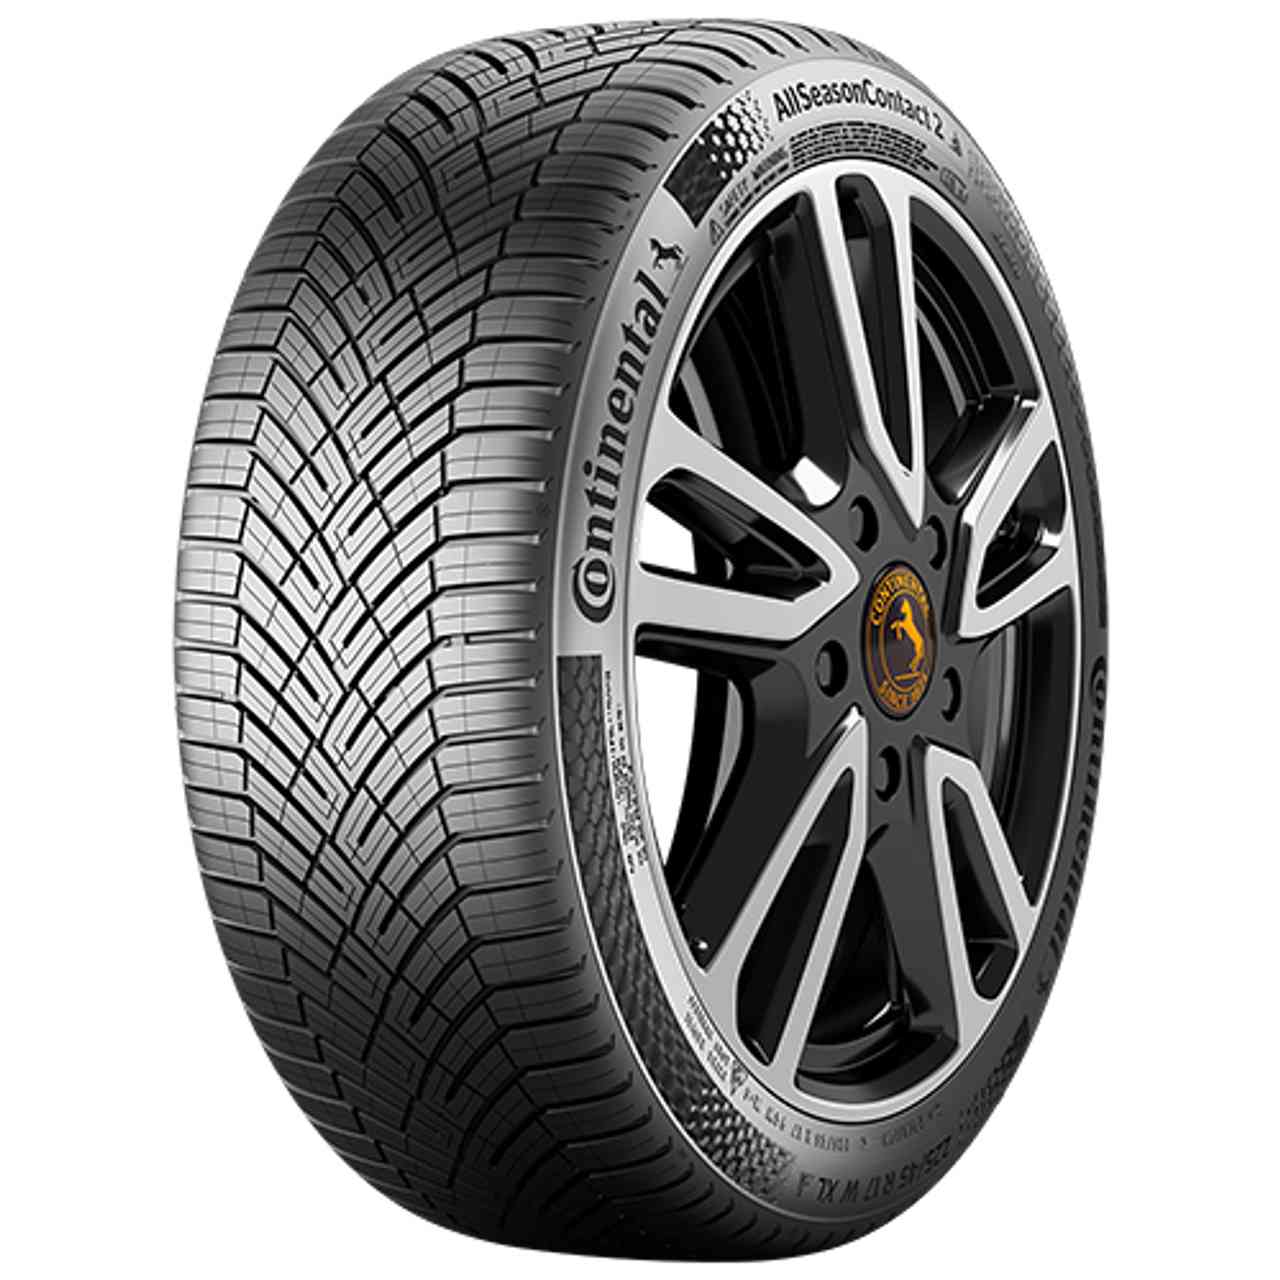 CONTINENTAL ALLSEASONCONTACT 2 (EVc) 205/45R16 83H FR BSW